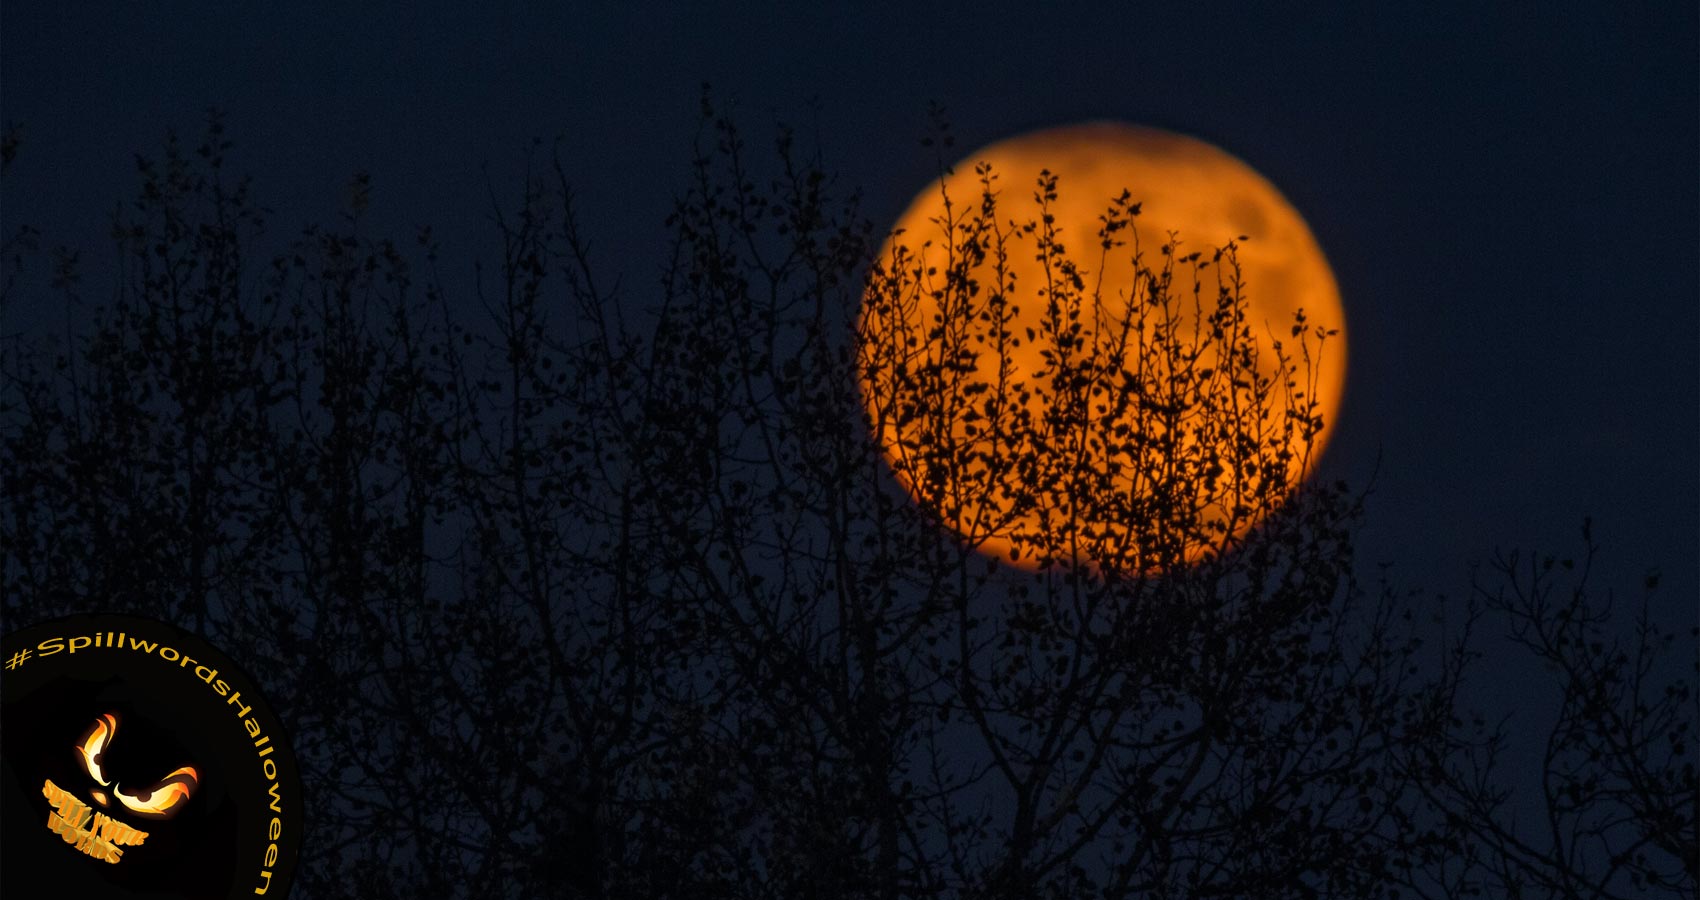 The Great Pumpkin Moon, micropoetry by Bartholomew Barker at Spillwords.com